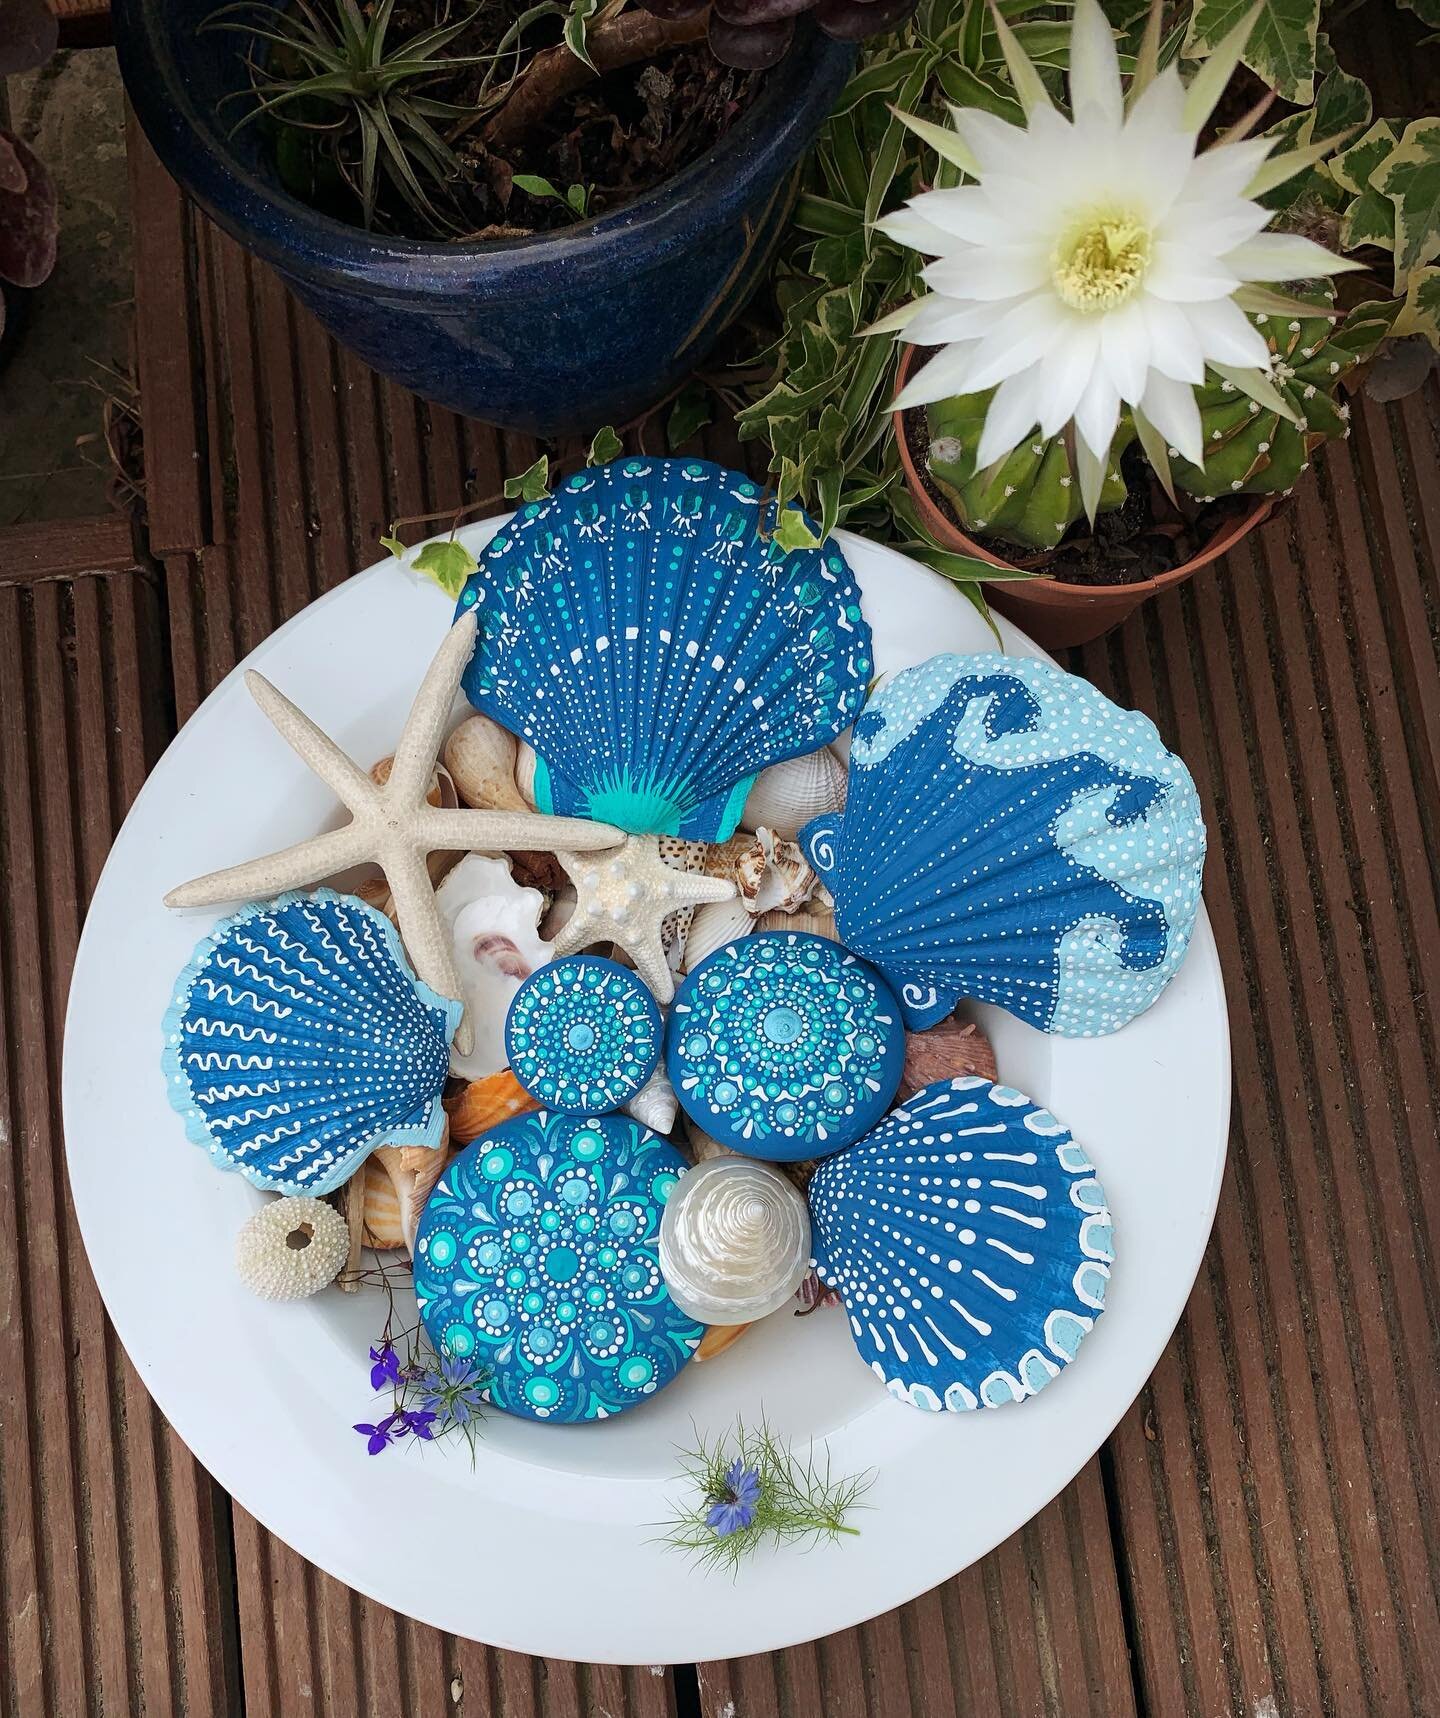 Its been hot hot hot 🥵 this week here in Jersey so here&rsquo;s a plate of cool 😎 &ldquo;Admiral blue&rdquo;  to counteract the heat! Happy Friday everyone 😊